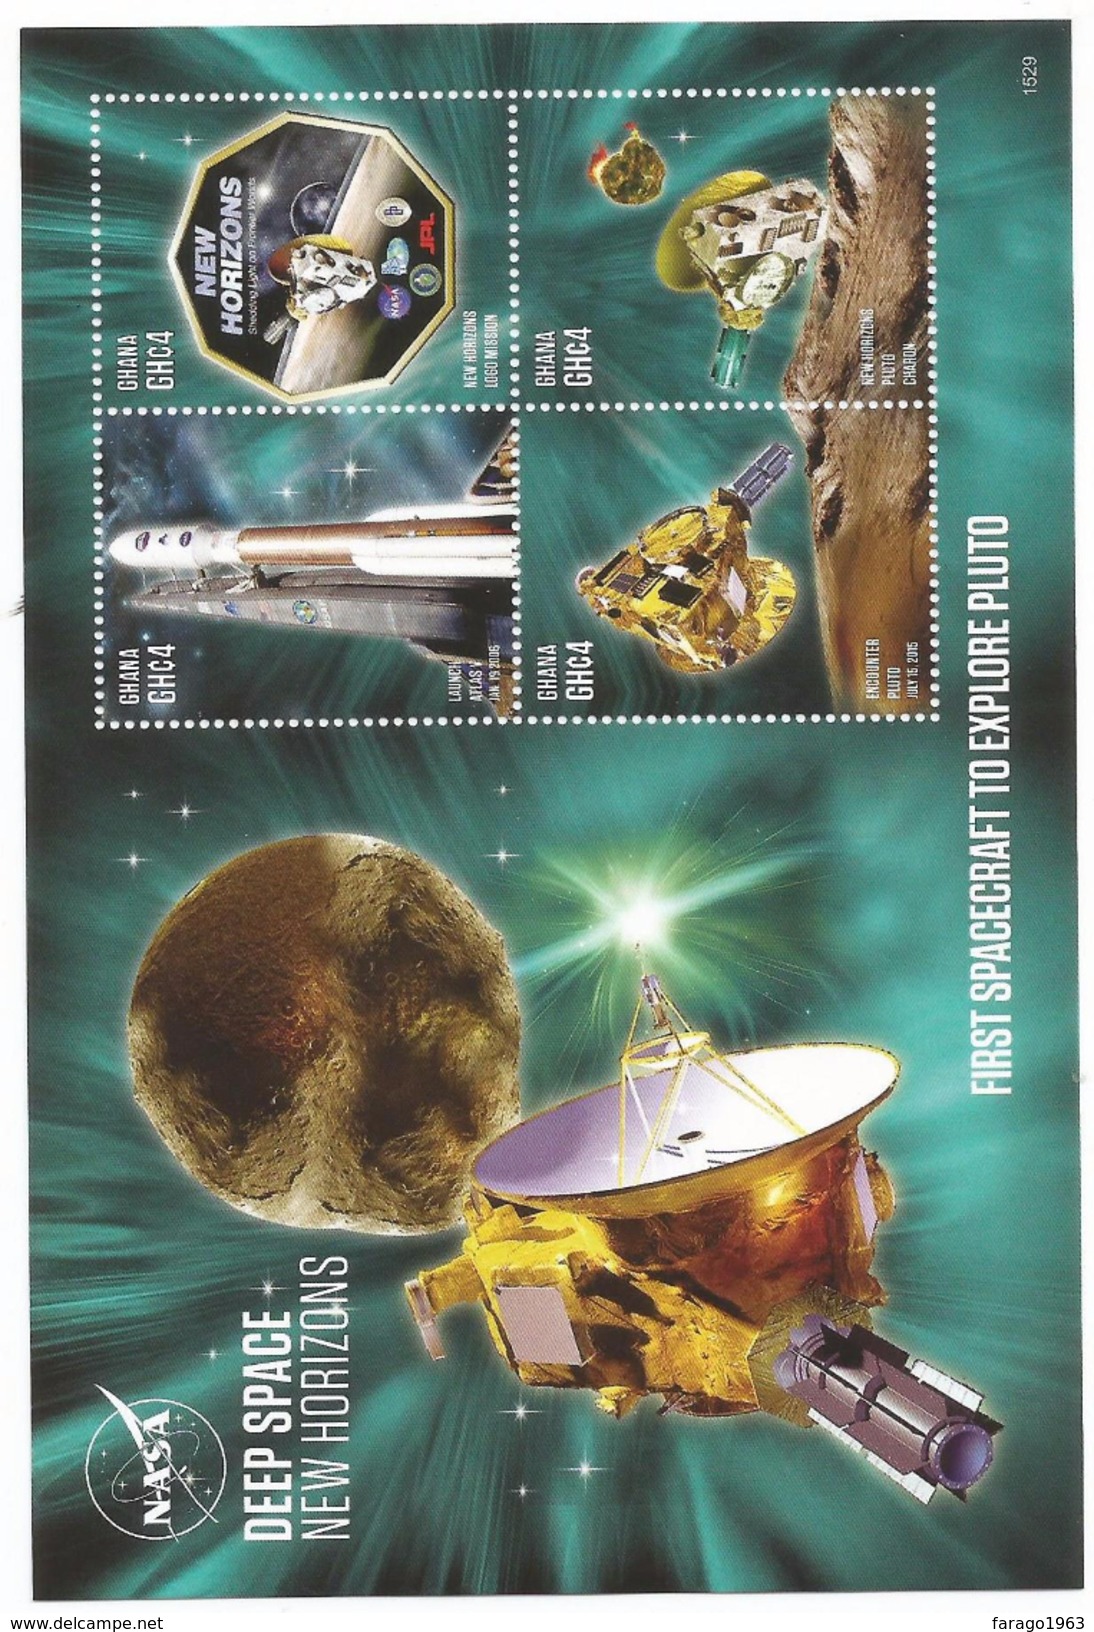 2015 Ghana NASA Space Planets New Horizons Visits Pluto Astronomy  Complete Set Of 2 Sheets  MNH  BELOW FACE VALUE - Ghana (1957-...)